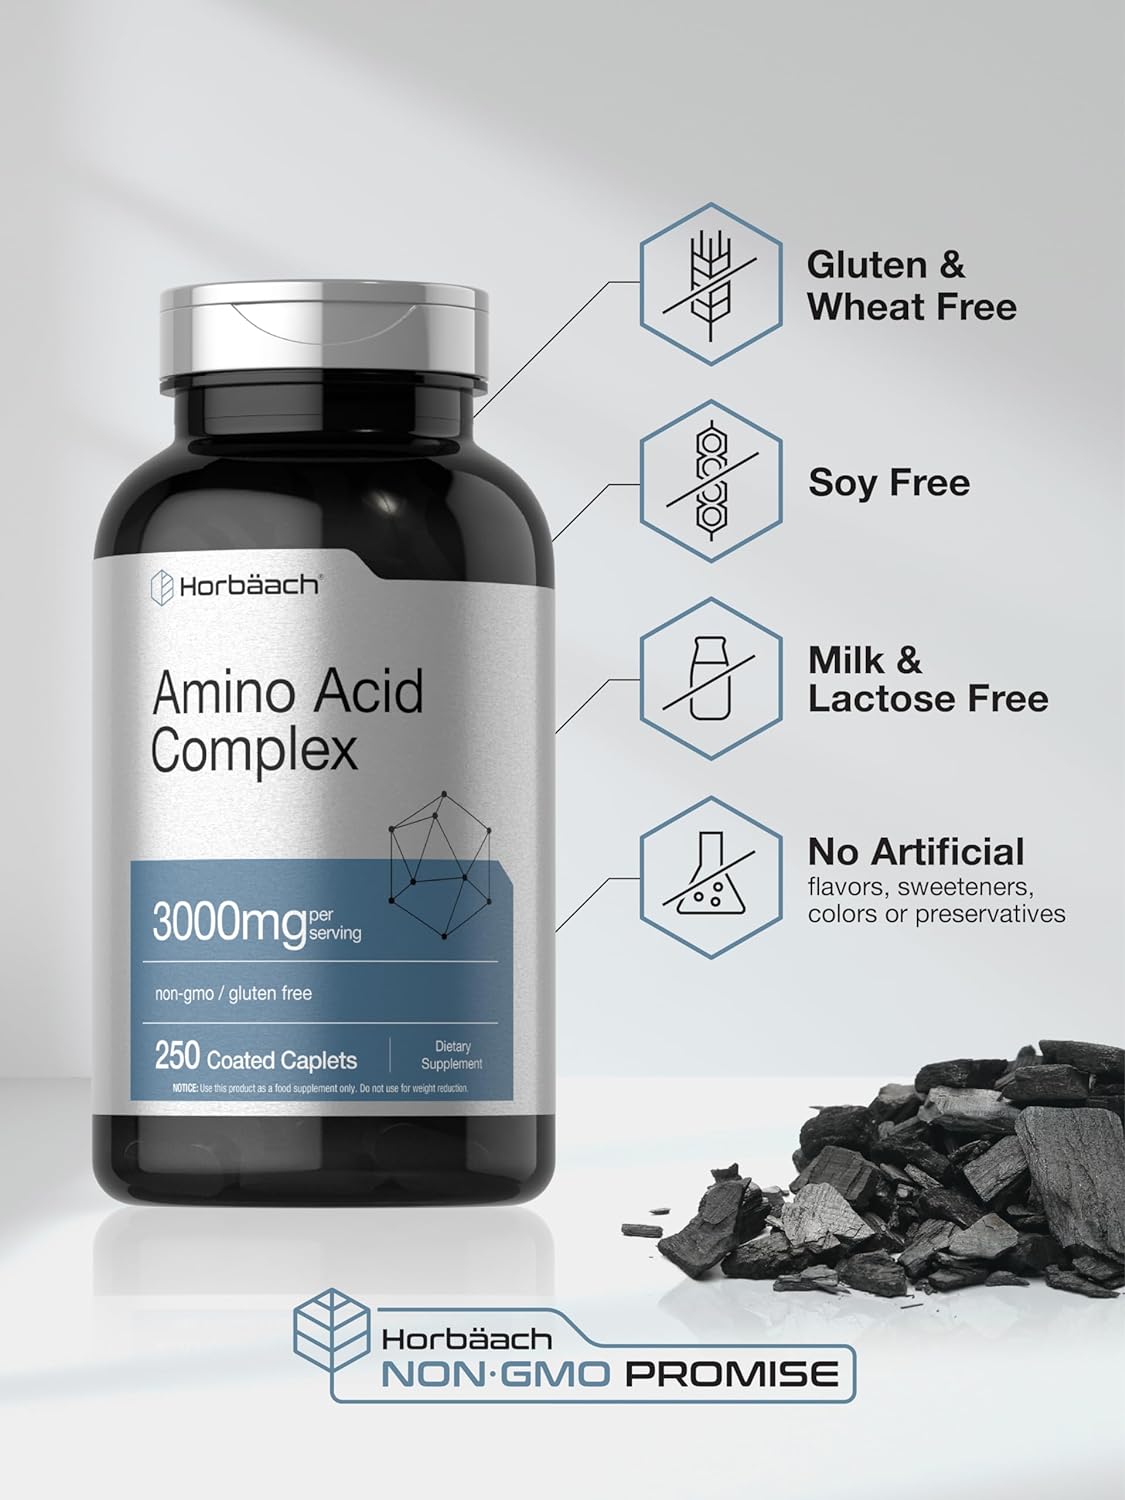 Amino Acid Complex 3000mg | 250 Caplets | by Horbaach - image 4 of 7